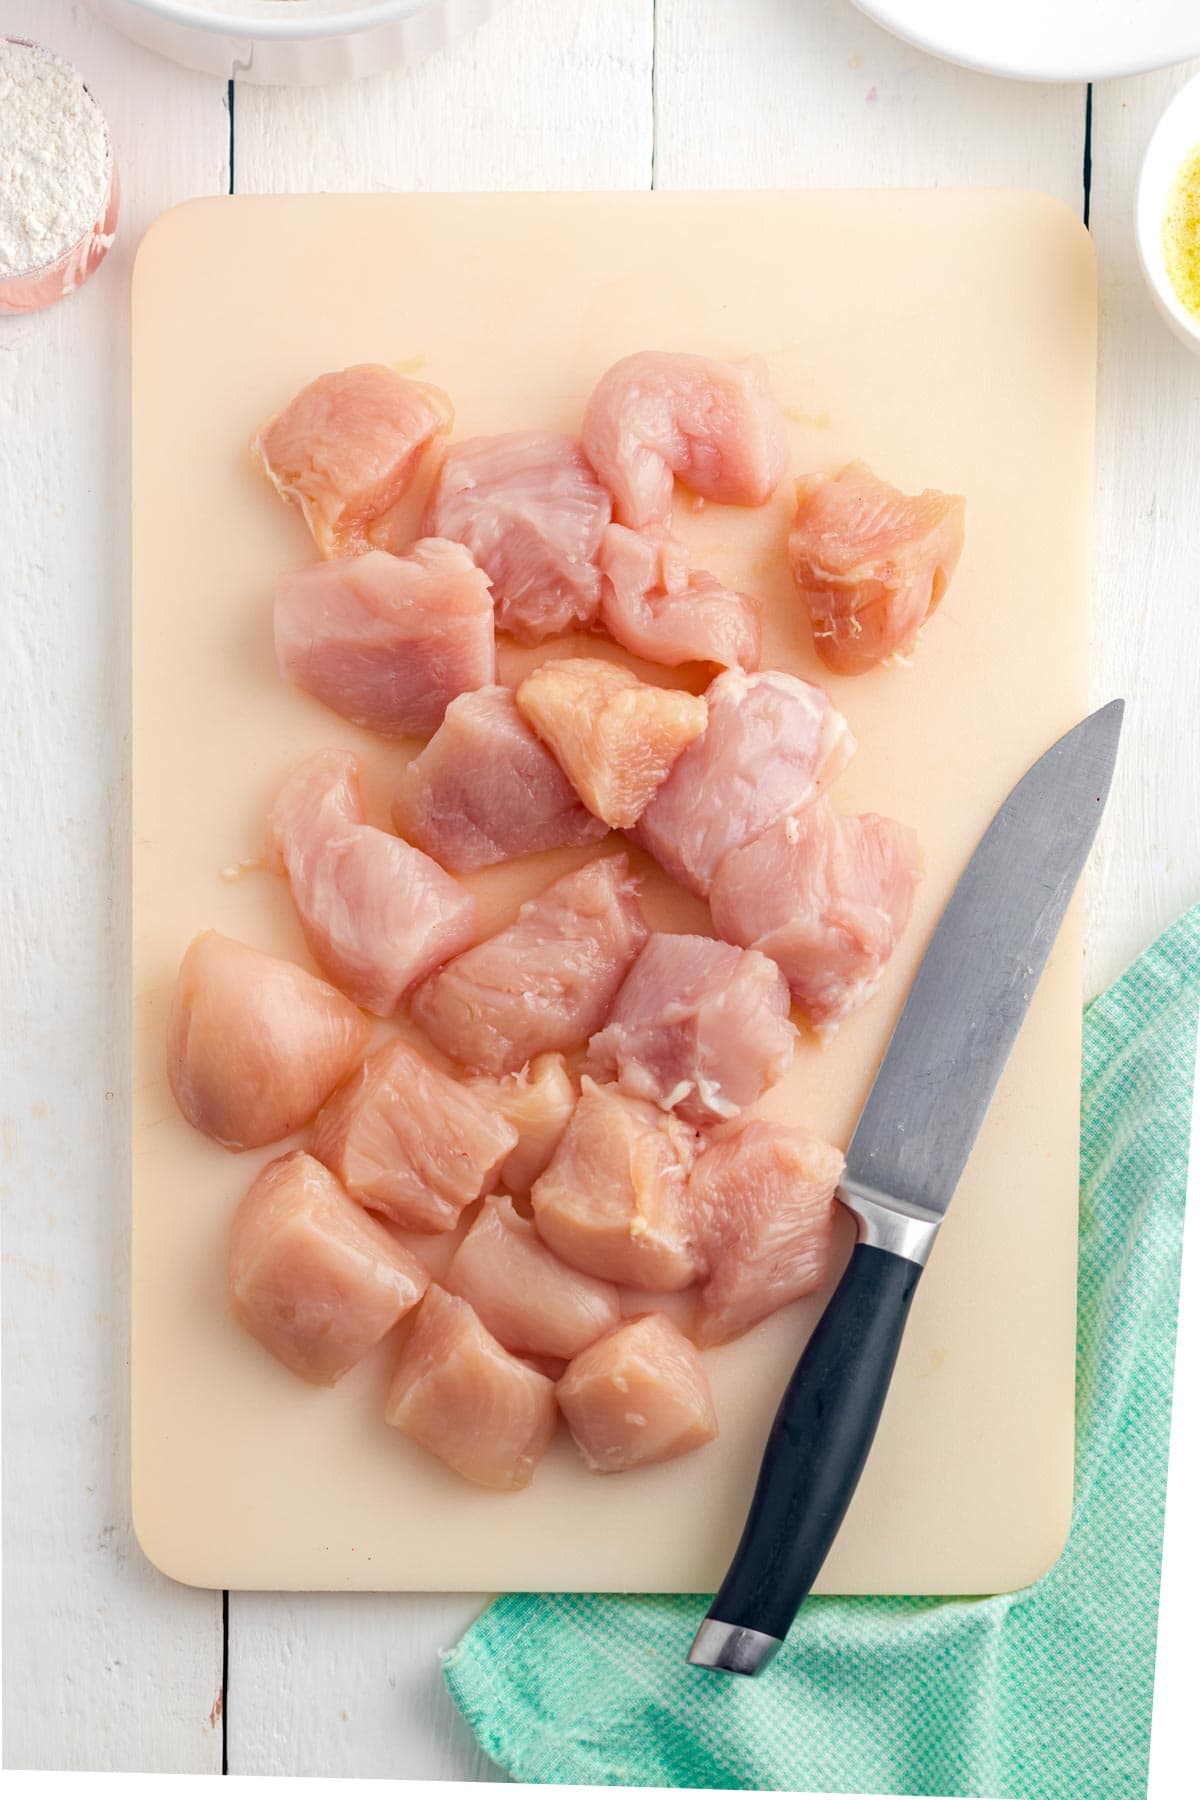 An overhead image of cutting the chicken into bite-sized nuggets ready to be breaded and fried.